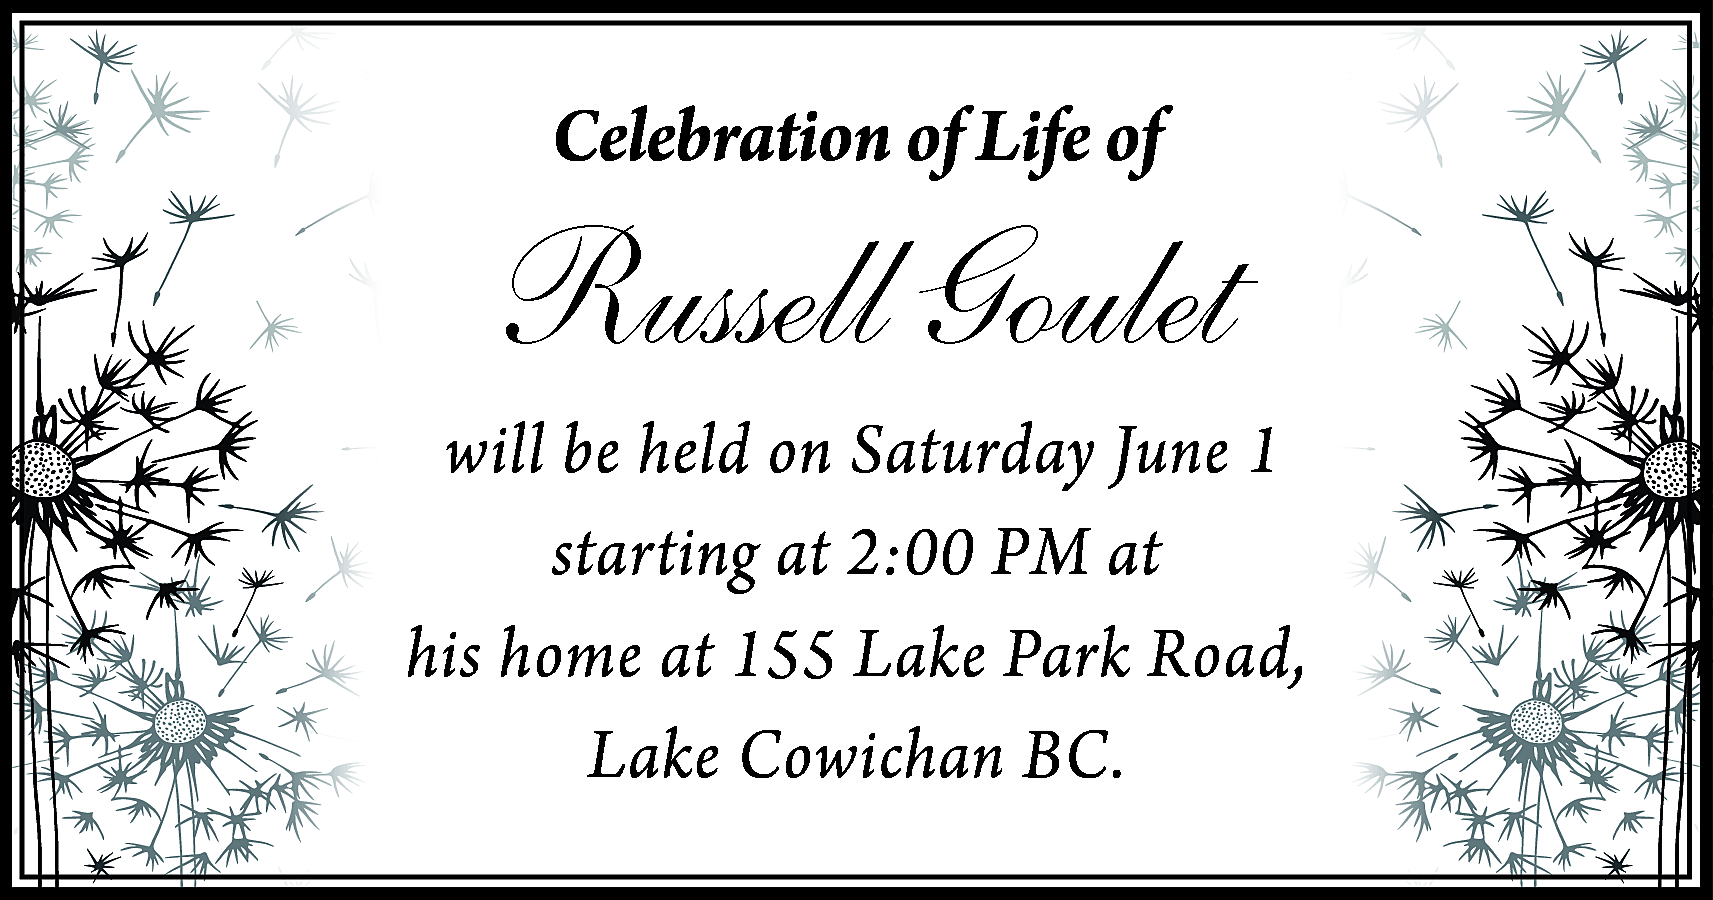 Celebration of Life of <br>  Celebration of Life of    Russell Goulet  will be held on Saturday June 1  starting at 2:00 PM at  his home at 155 Lake Park Road,  Lake Cowichan BC.    